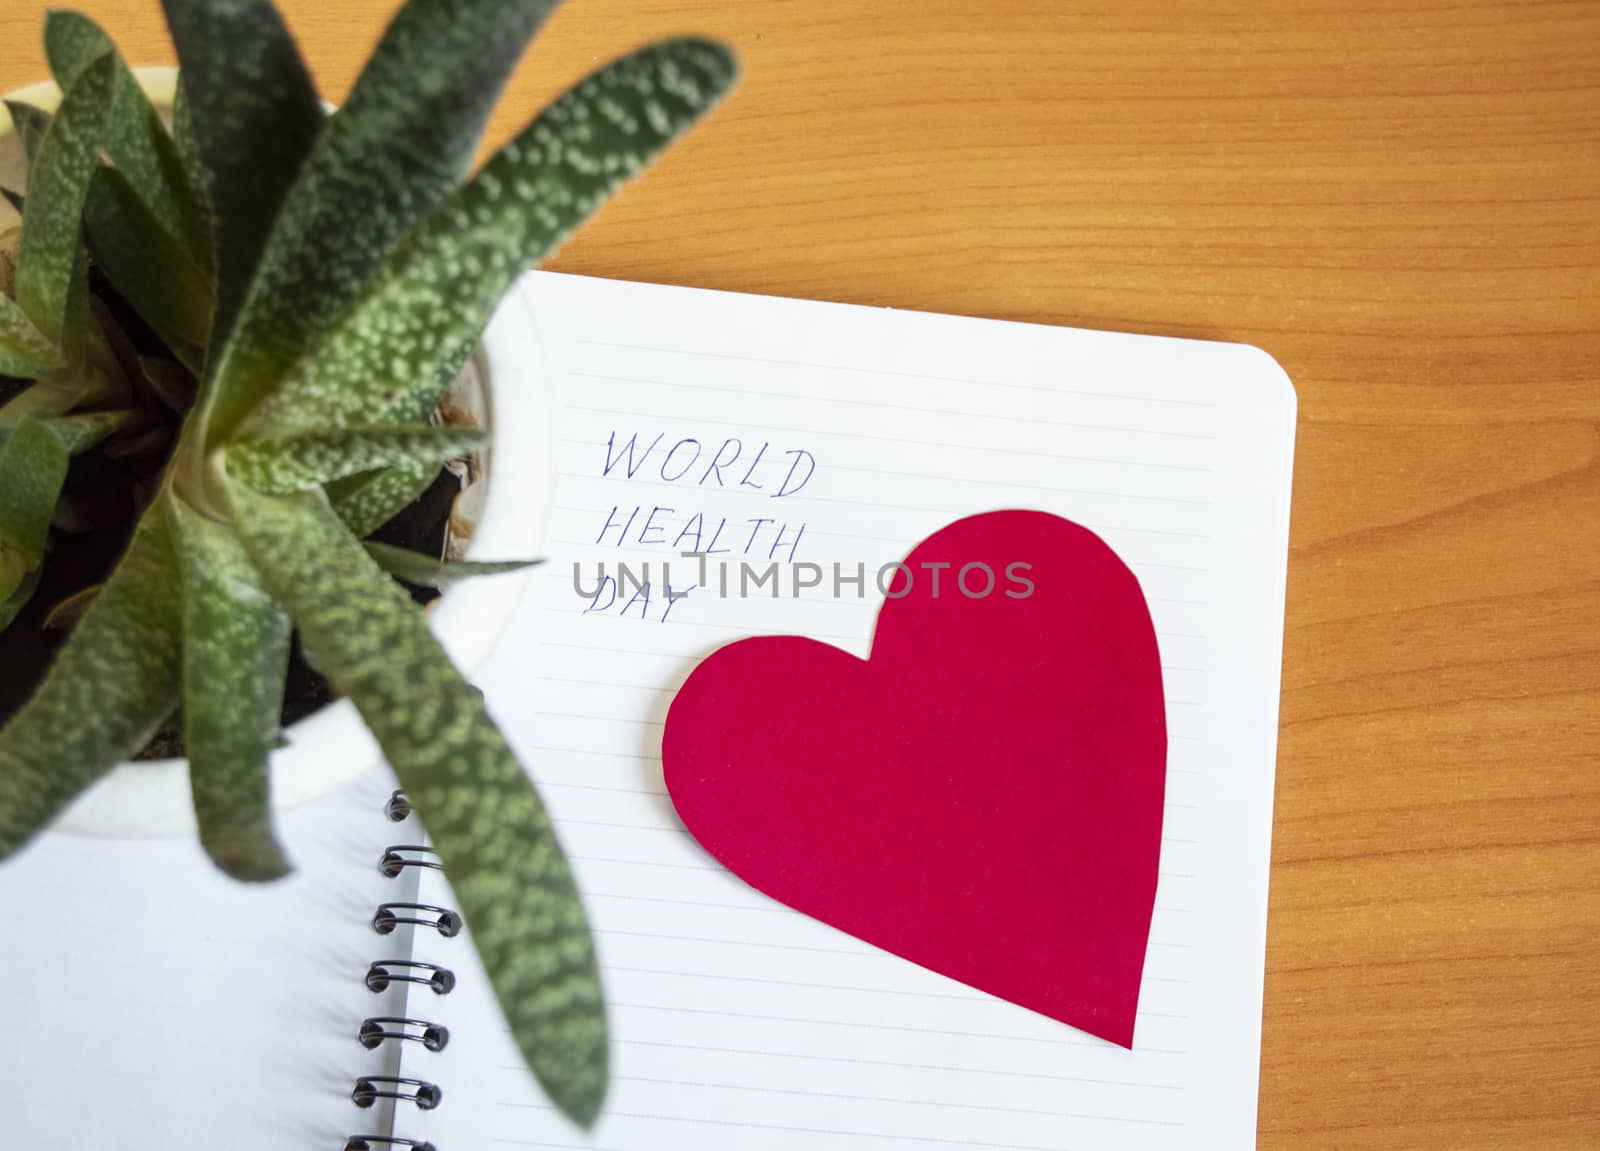 World health day is written on a notebook, next to a live succulent flower in a pot and a red heart. Conceptual image